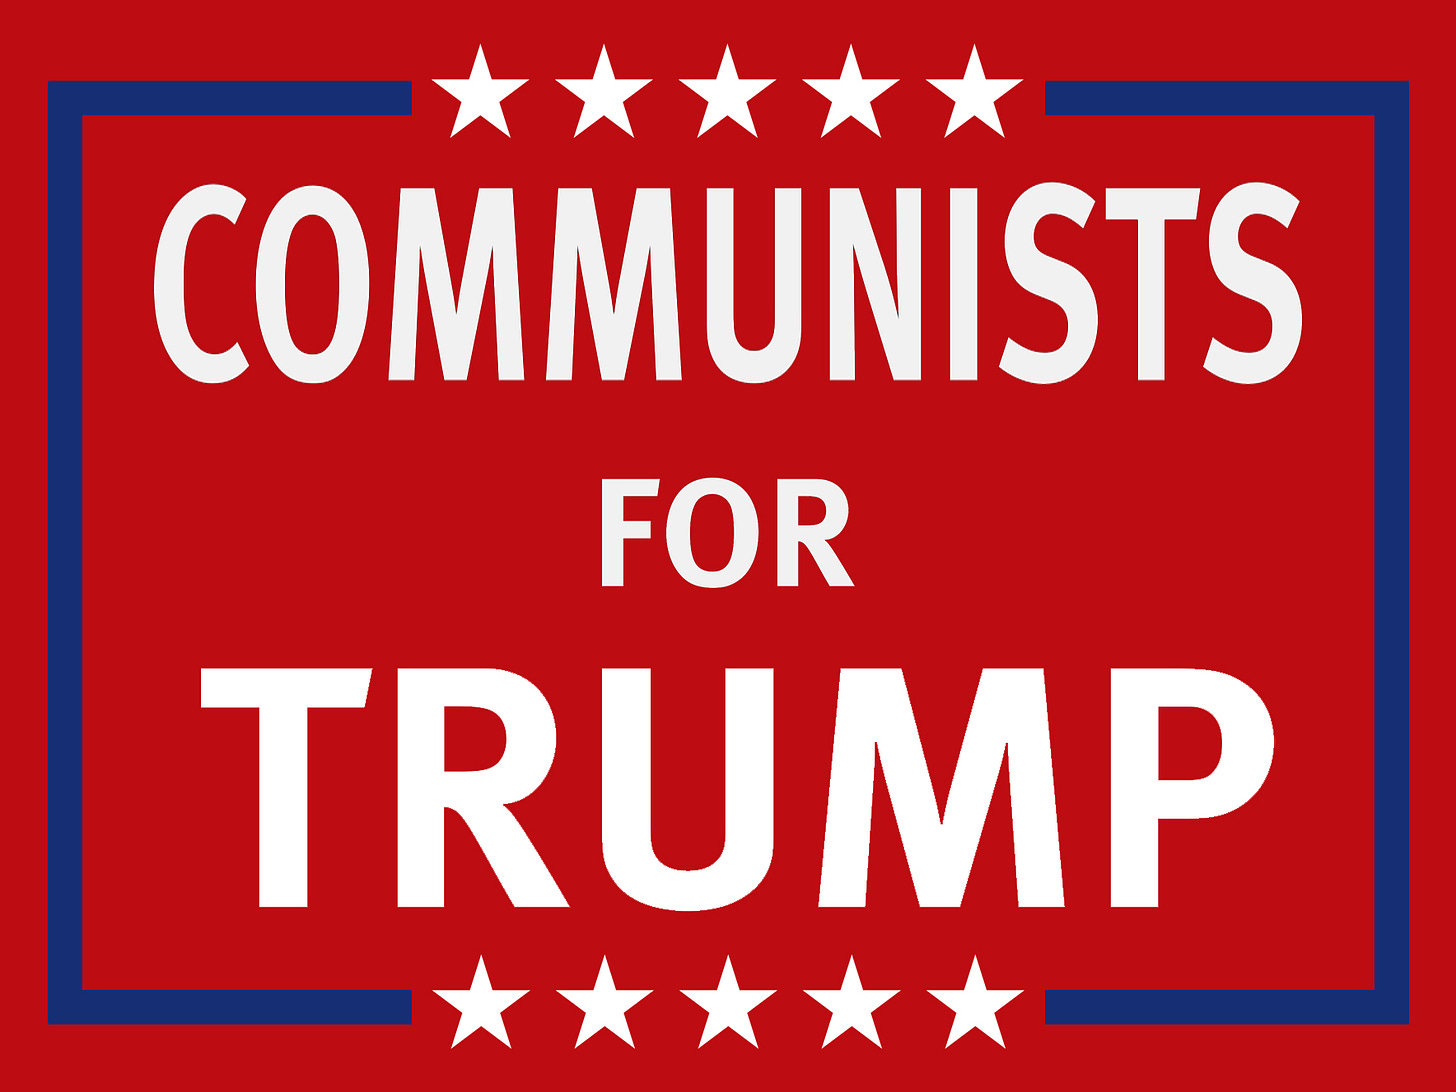 A Final Word on “MAGA Communism” and Social Conservatism